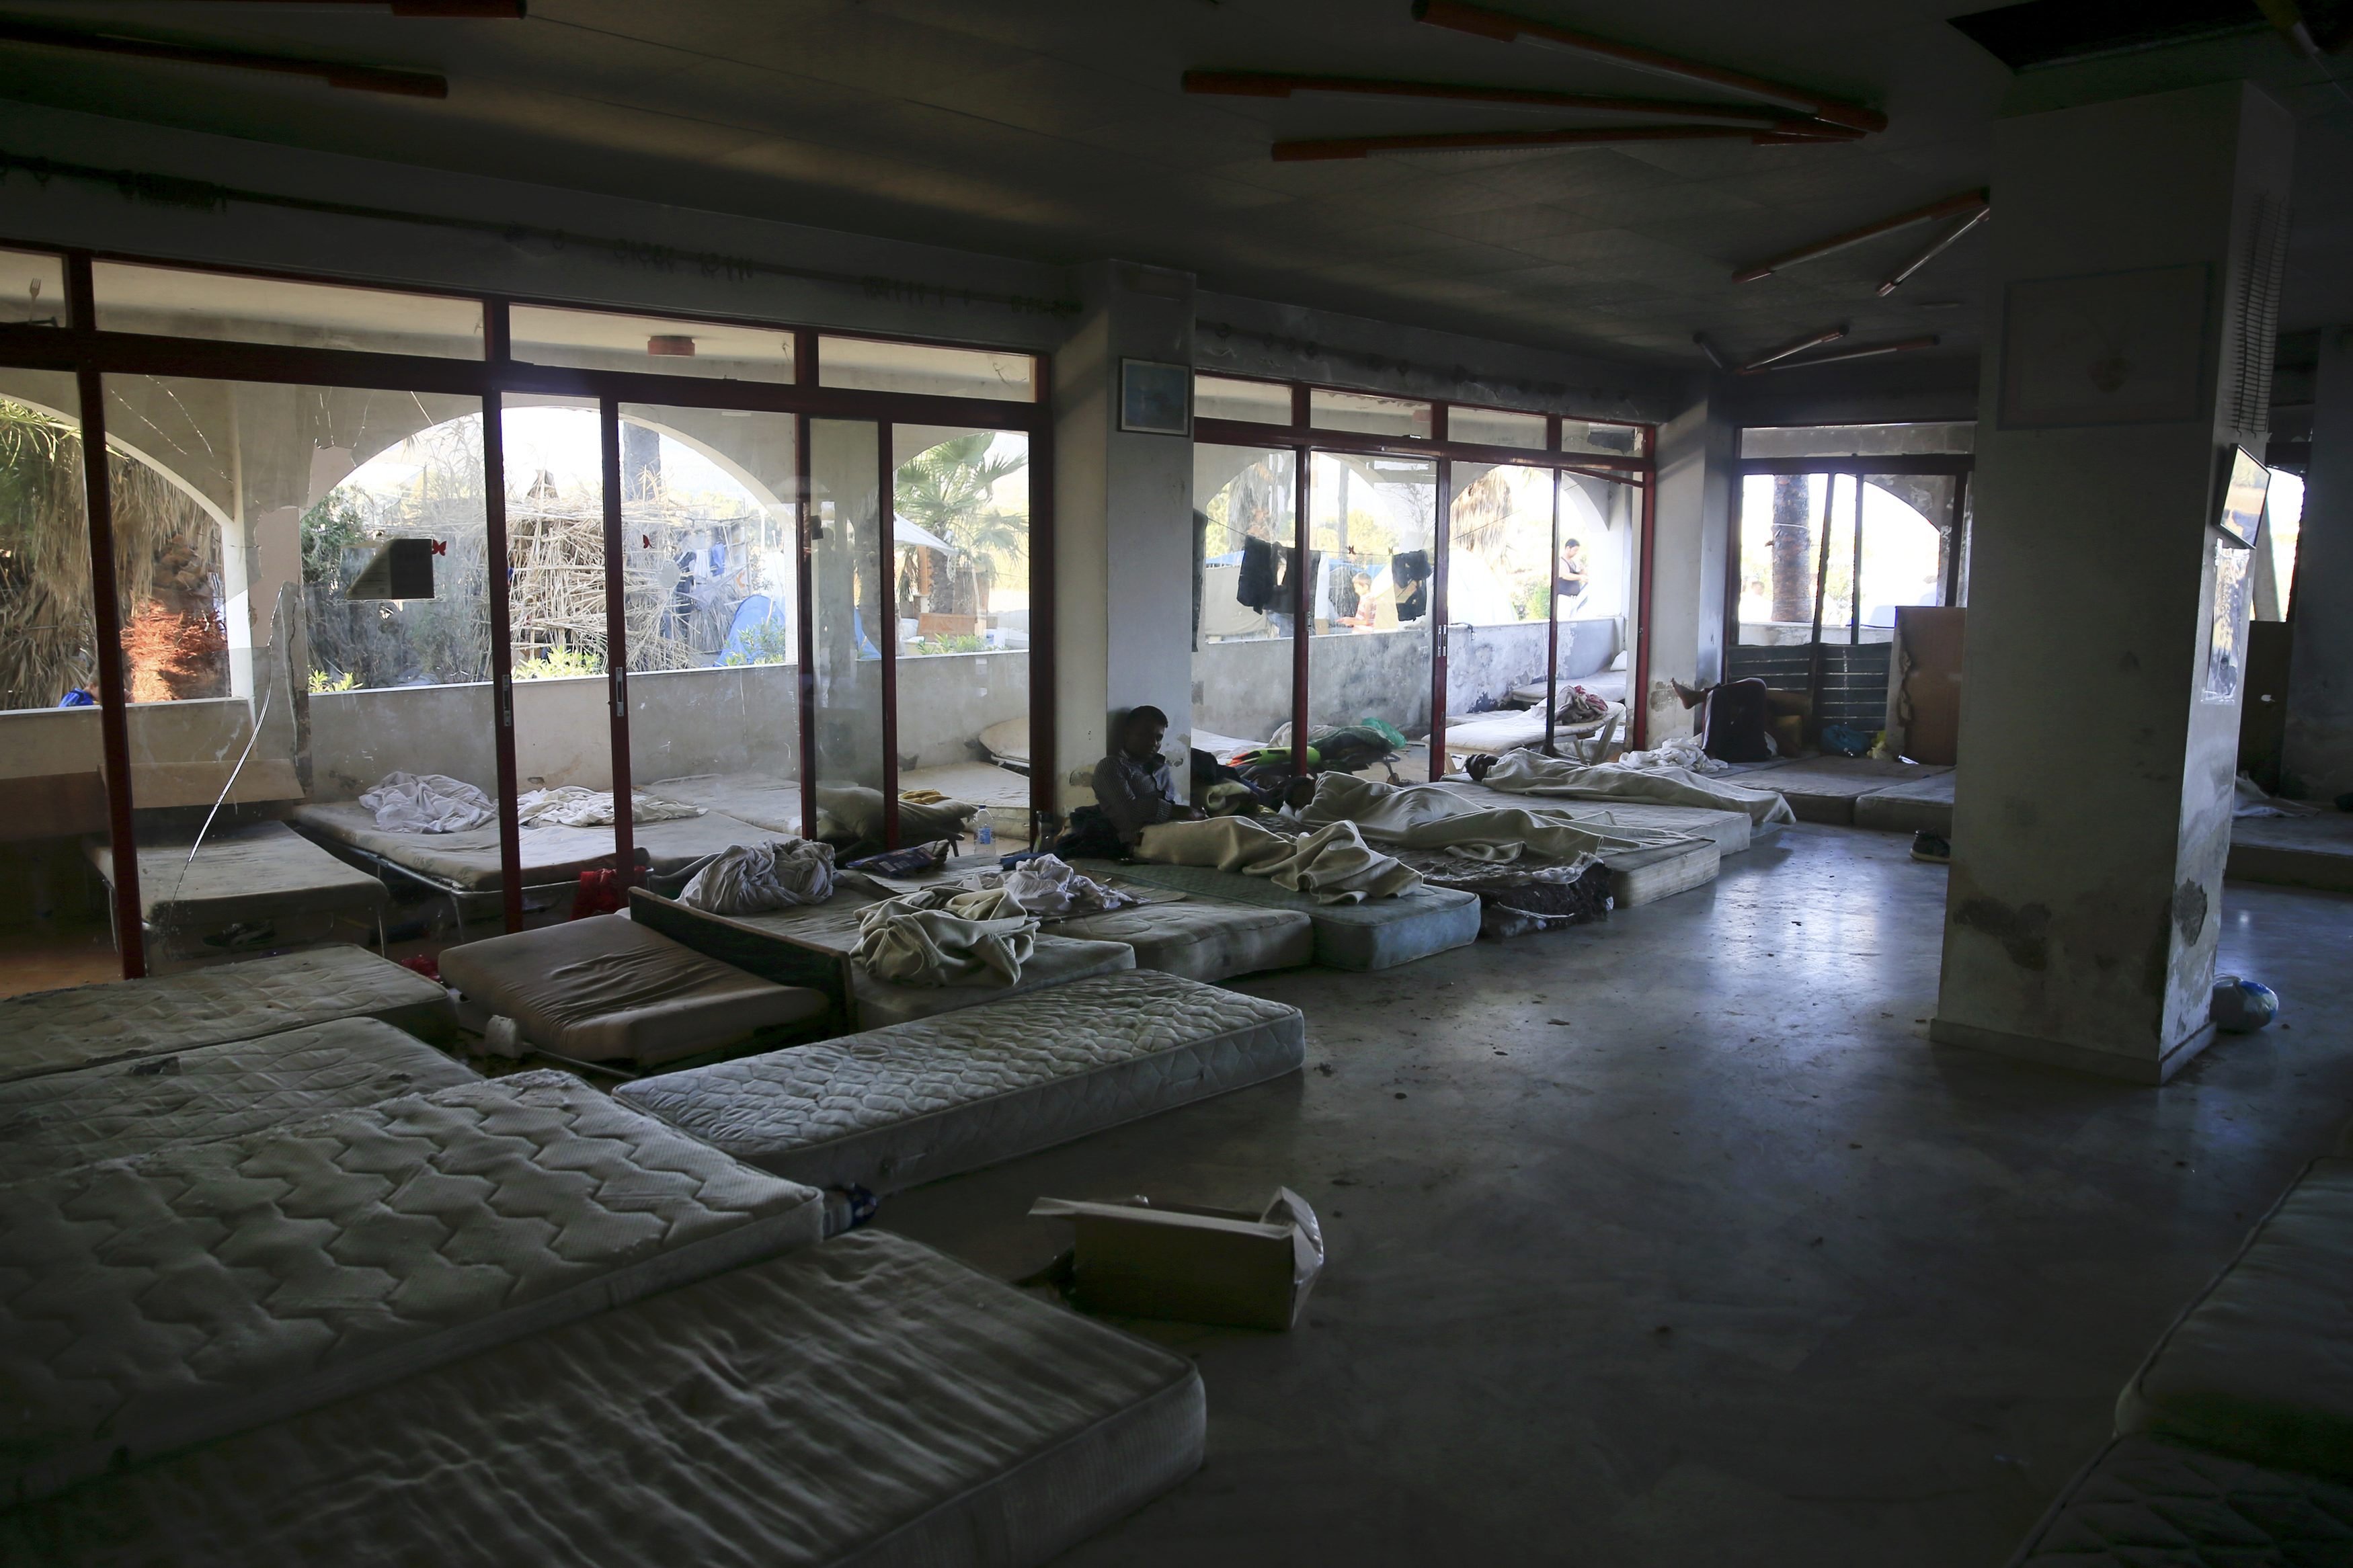 Mattresses used by migrants are seen at the lobby of a deserted hotel on the Greek island of Kos, August 13, 2015. The United Nations refugee agency (UNHCR) called on Greece to take control of the 